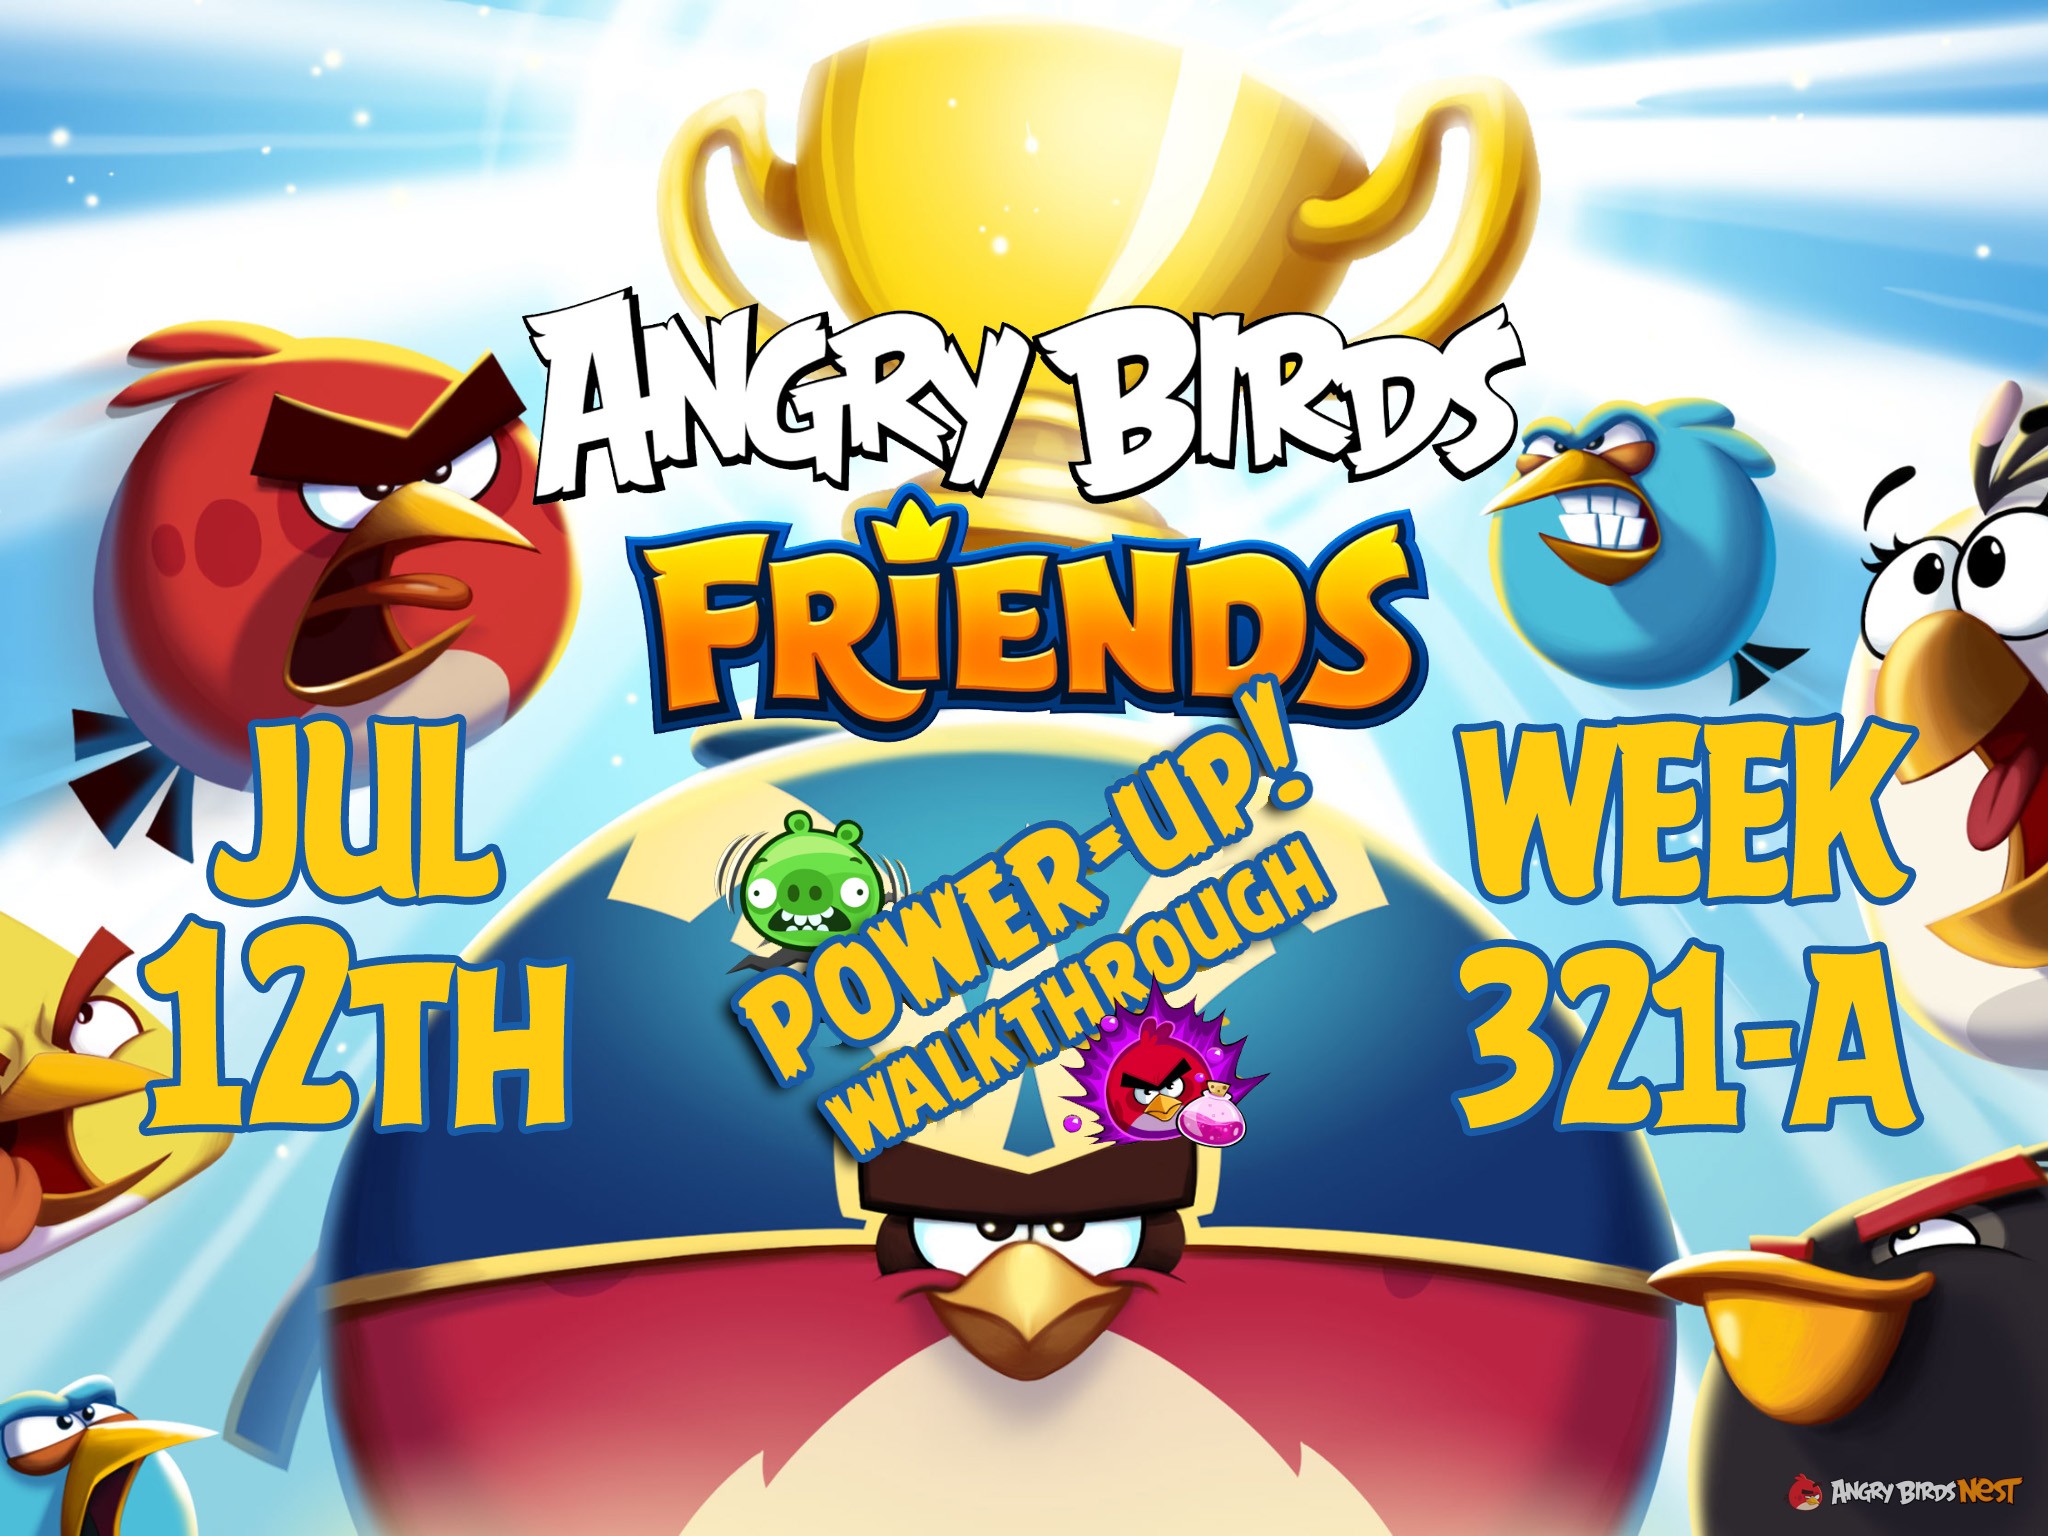 Angry-Birds-Friends-Tournament-Week-321-A-Feature-Image-PU